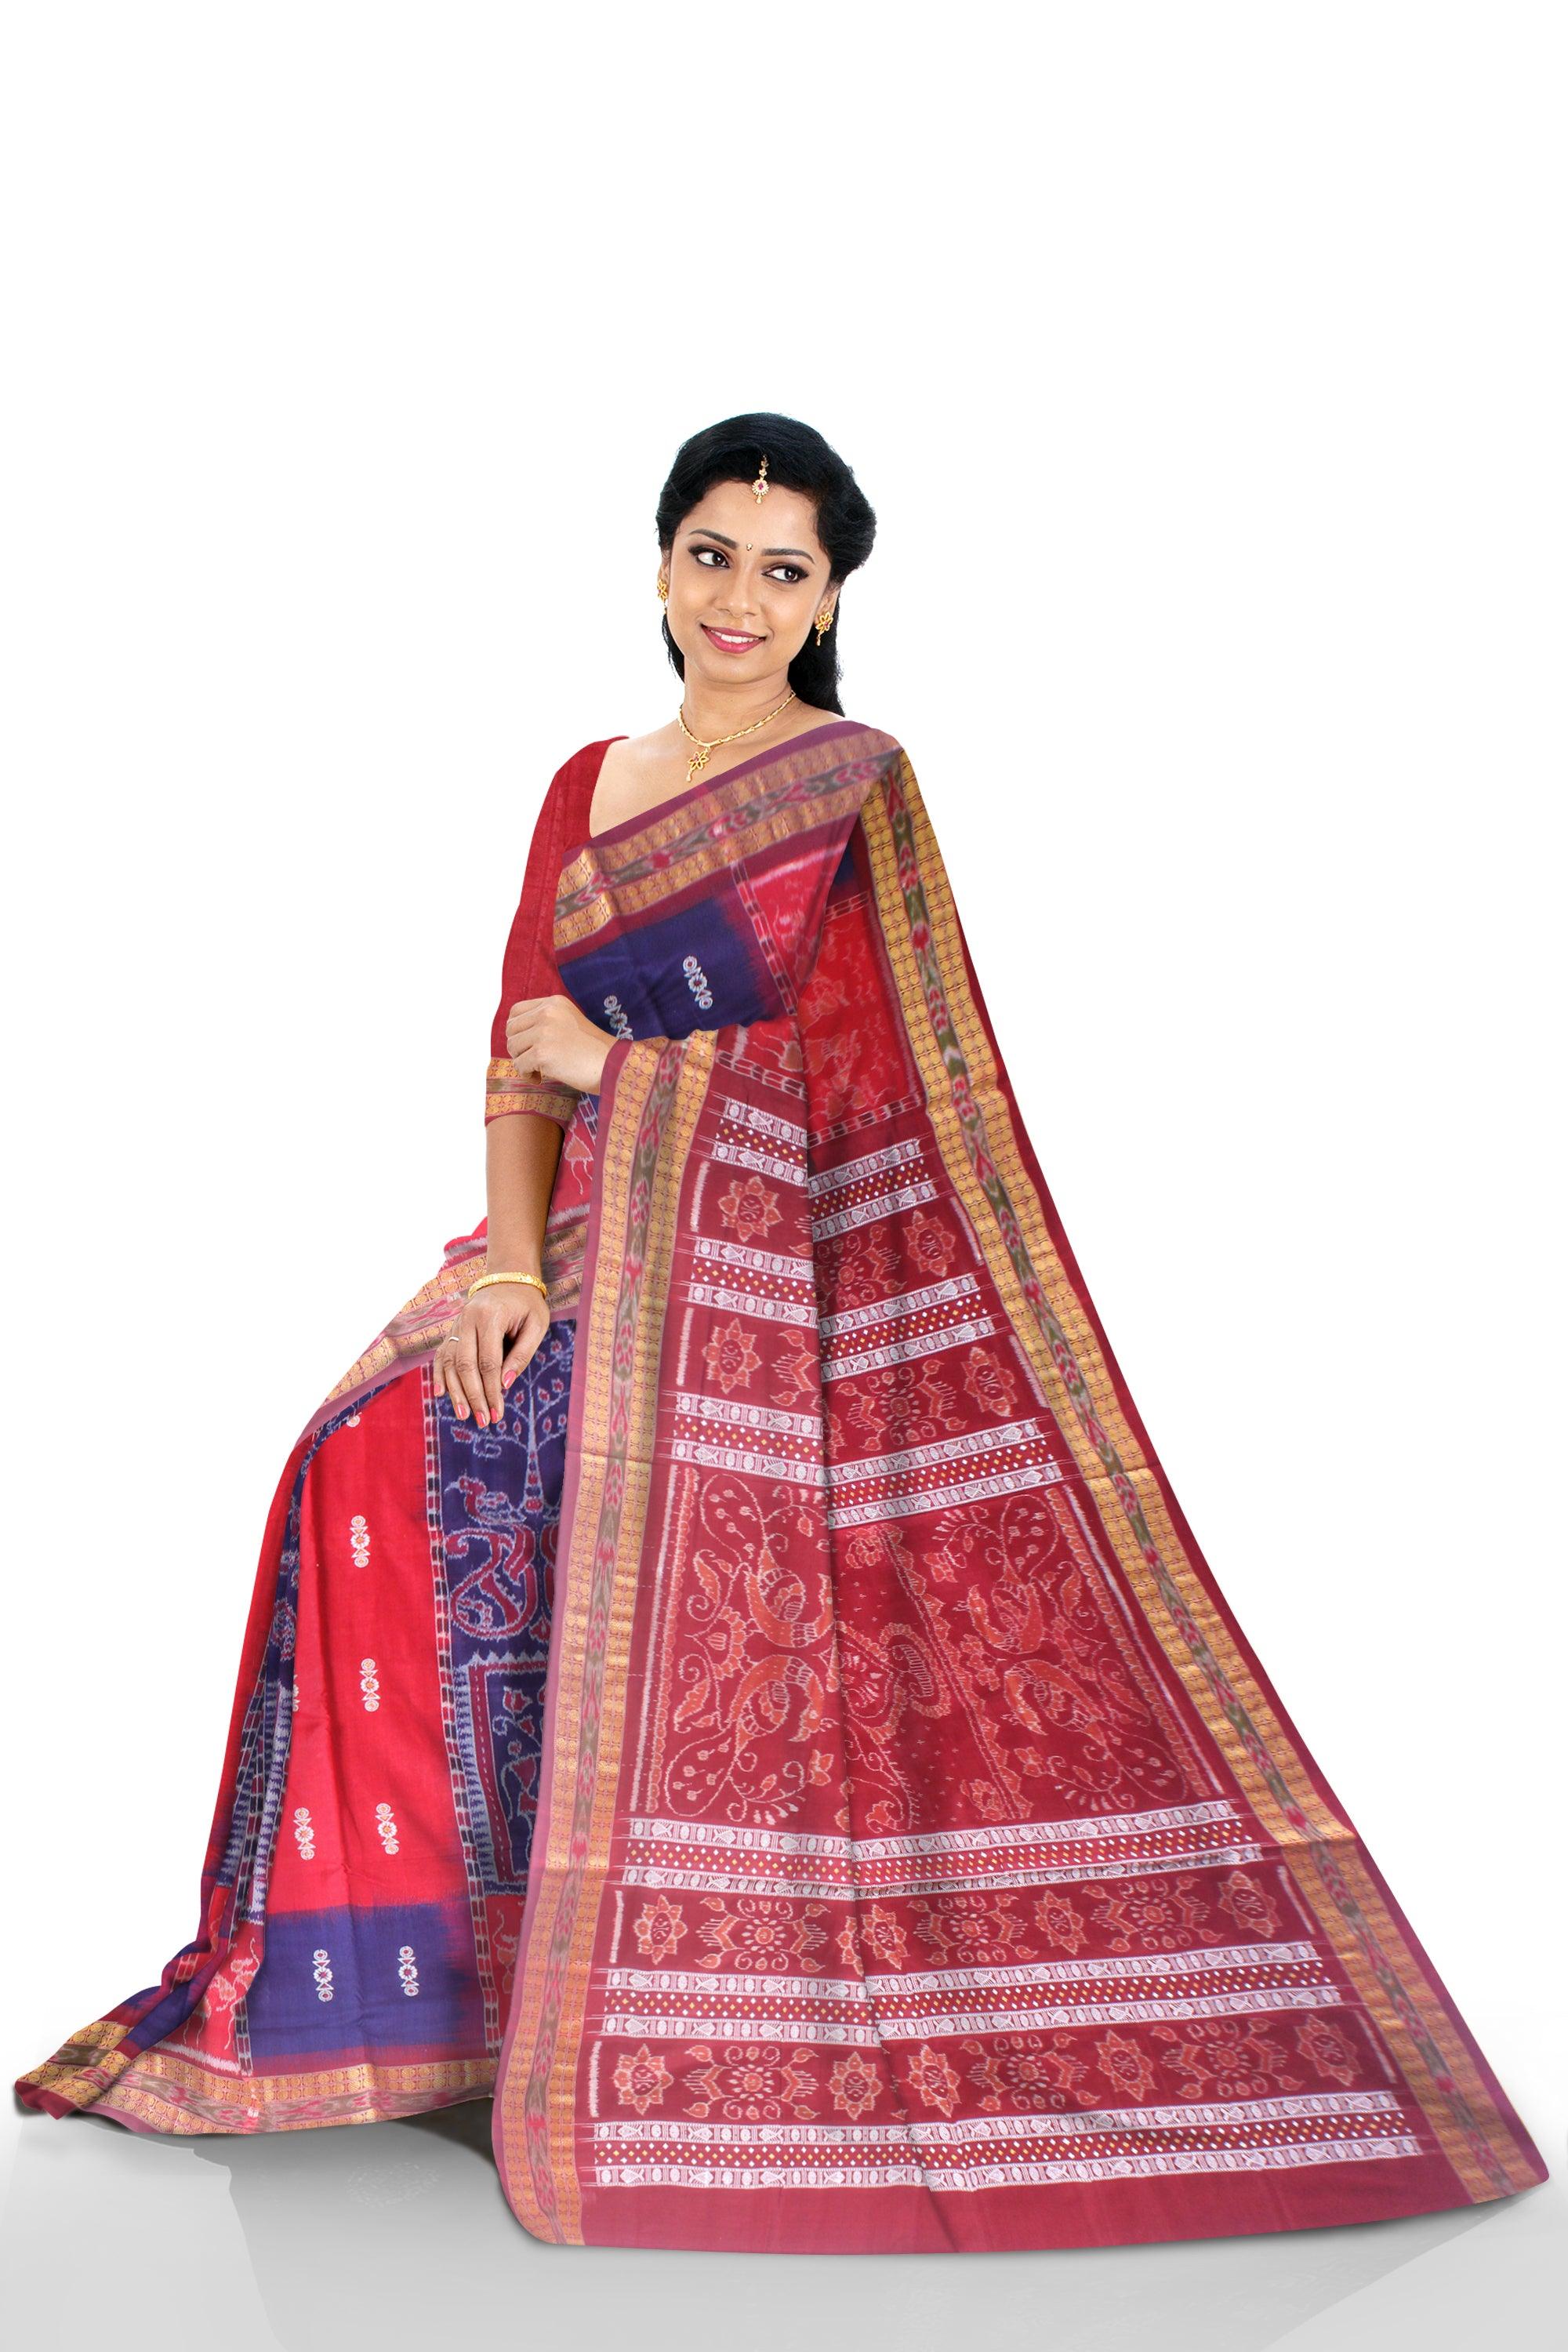 A BEAUTIFUL DESIGN  TERRACOTTA WITH TREE AND FLOWER BASED COTTON SAREE IN BLUE,RED AND MAROON AVAILABLE WITH BLOUSE . - Koshali Arts & Crafts Enterprise